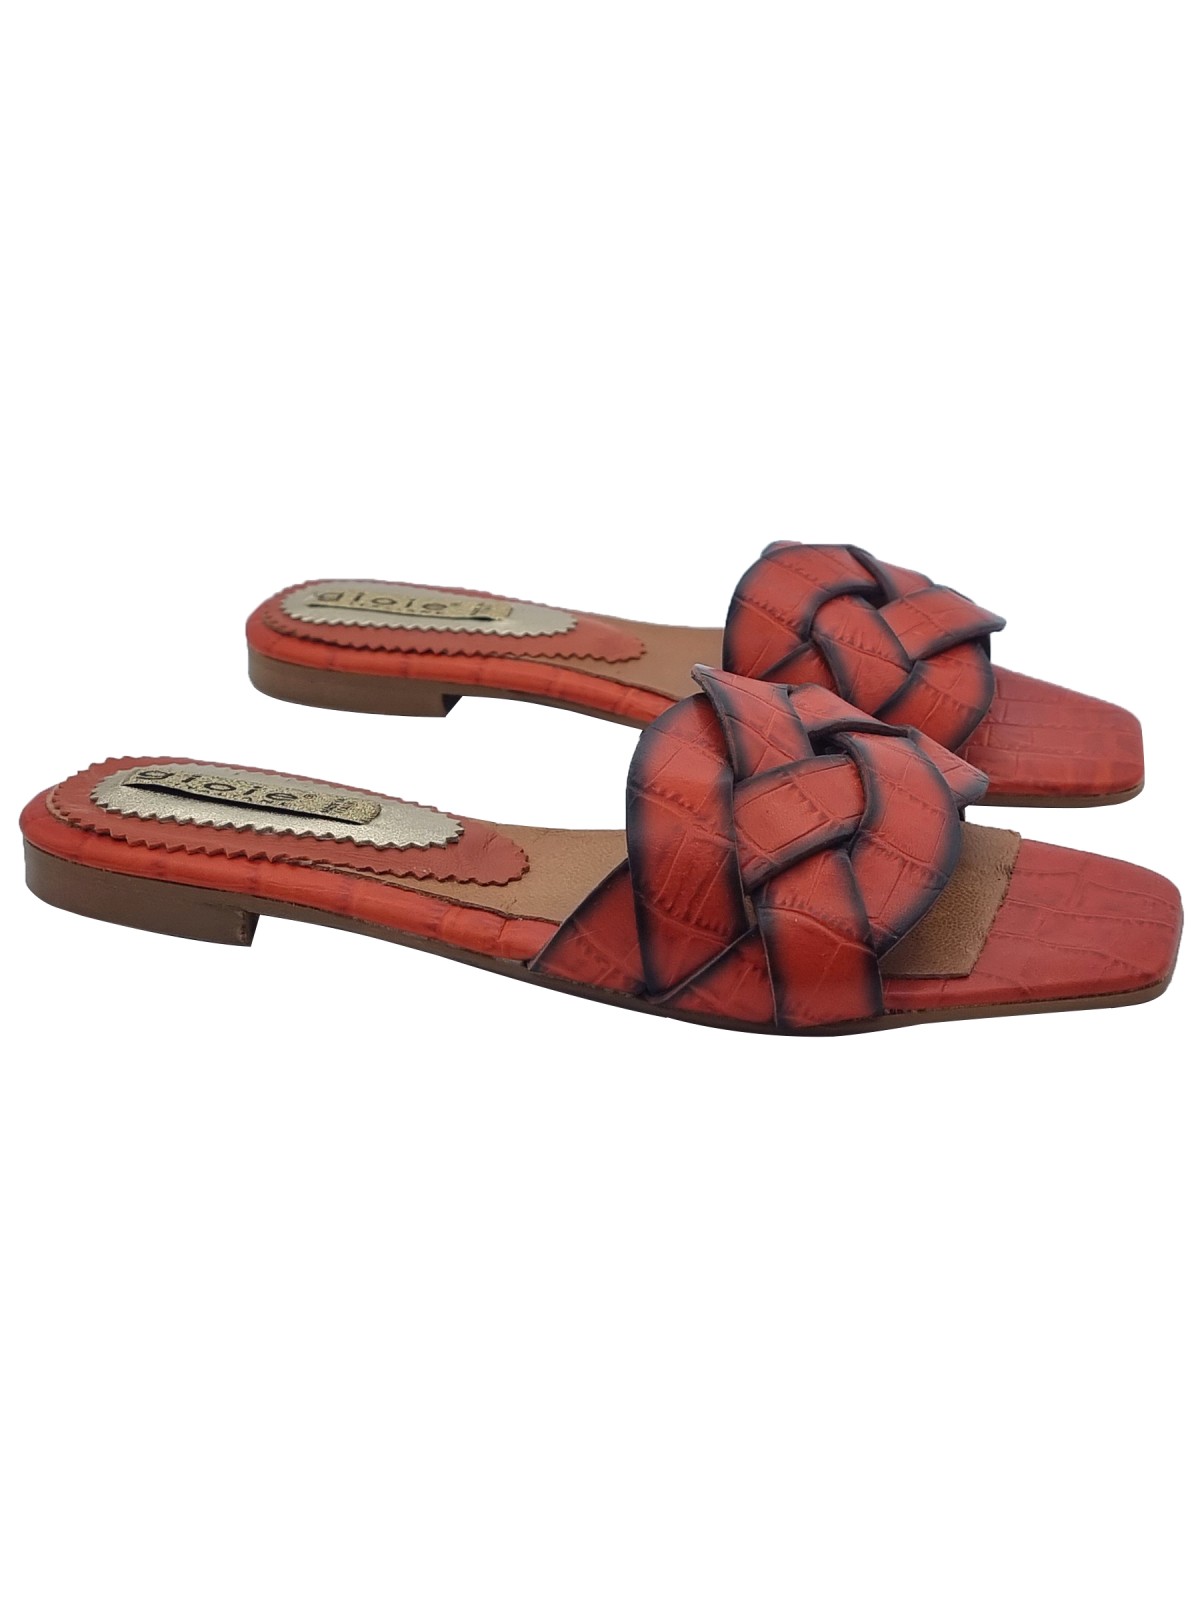 RED WOMEN'S CLOGS WITH BRAIDED BAND AND LOW HEEL